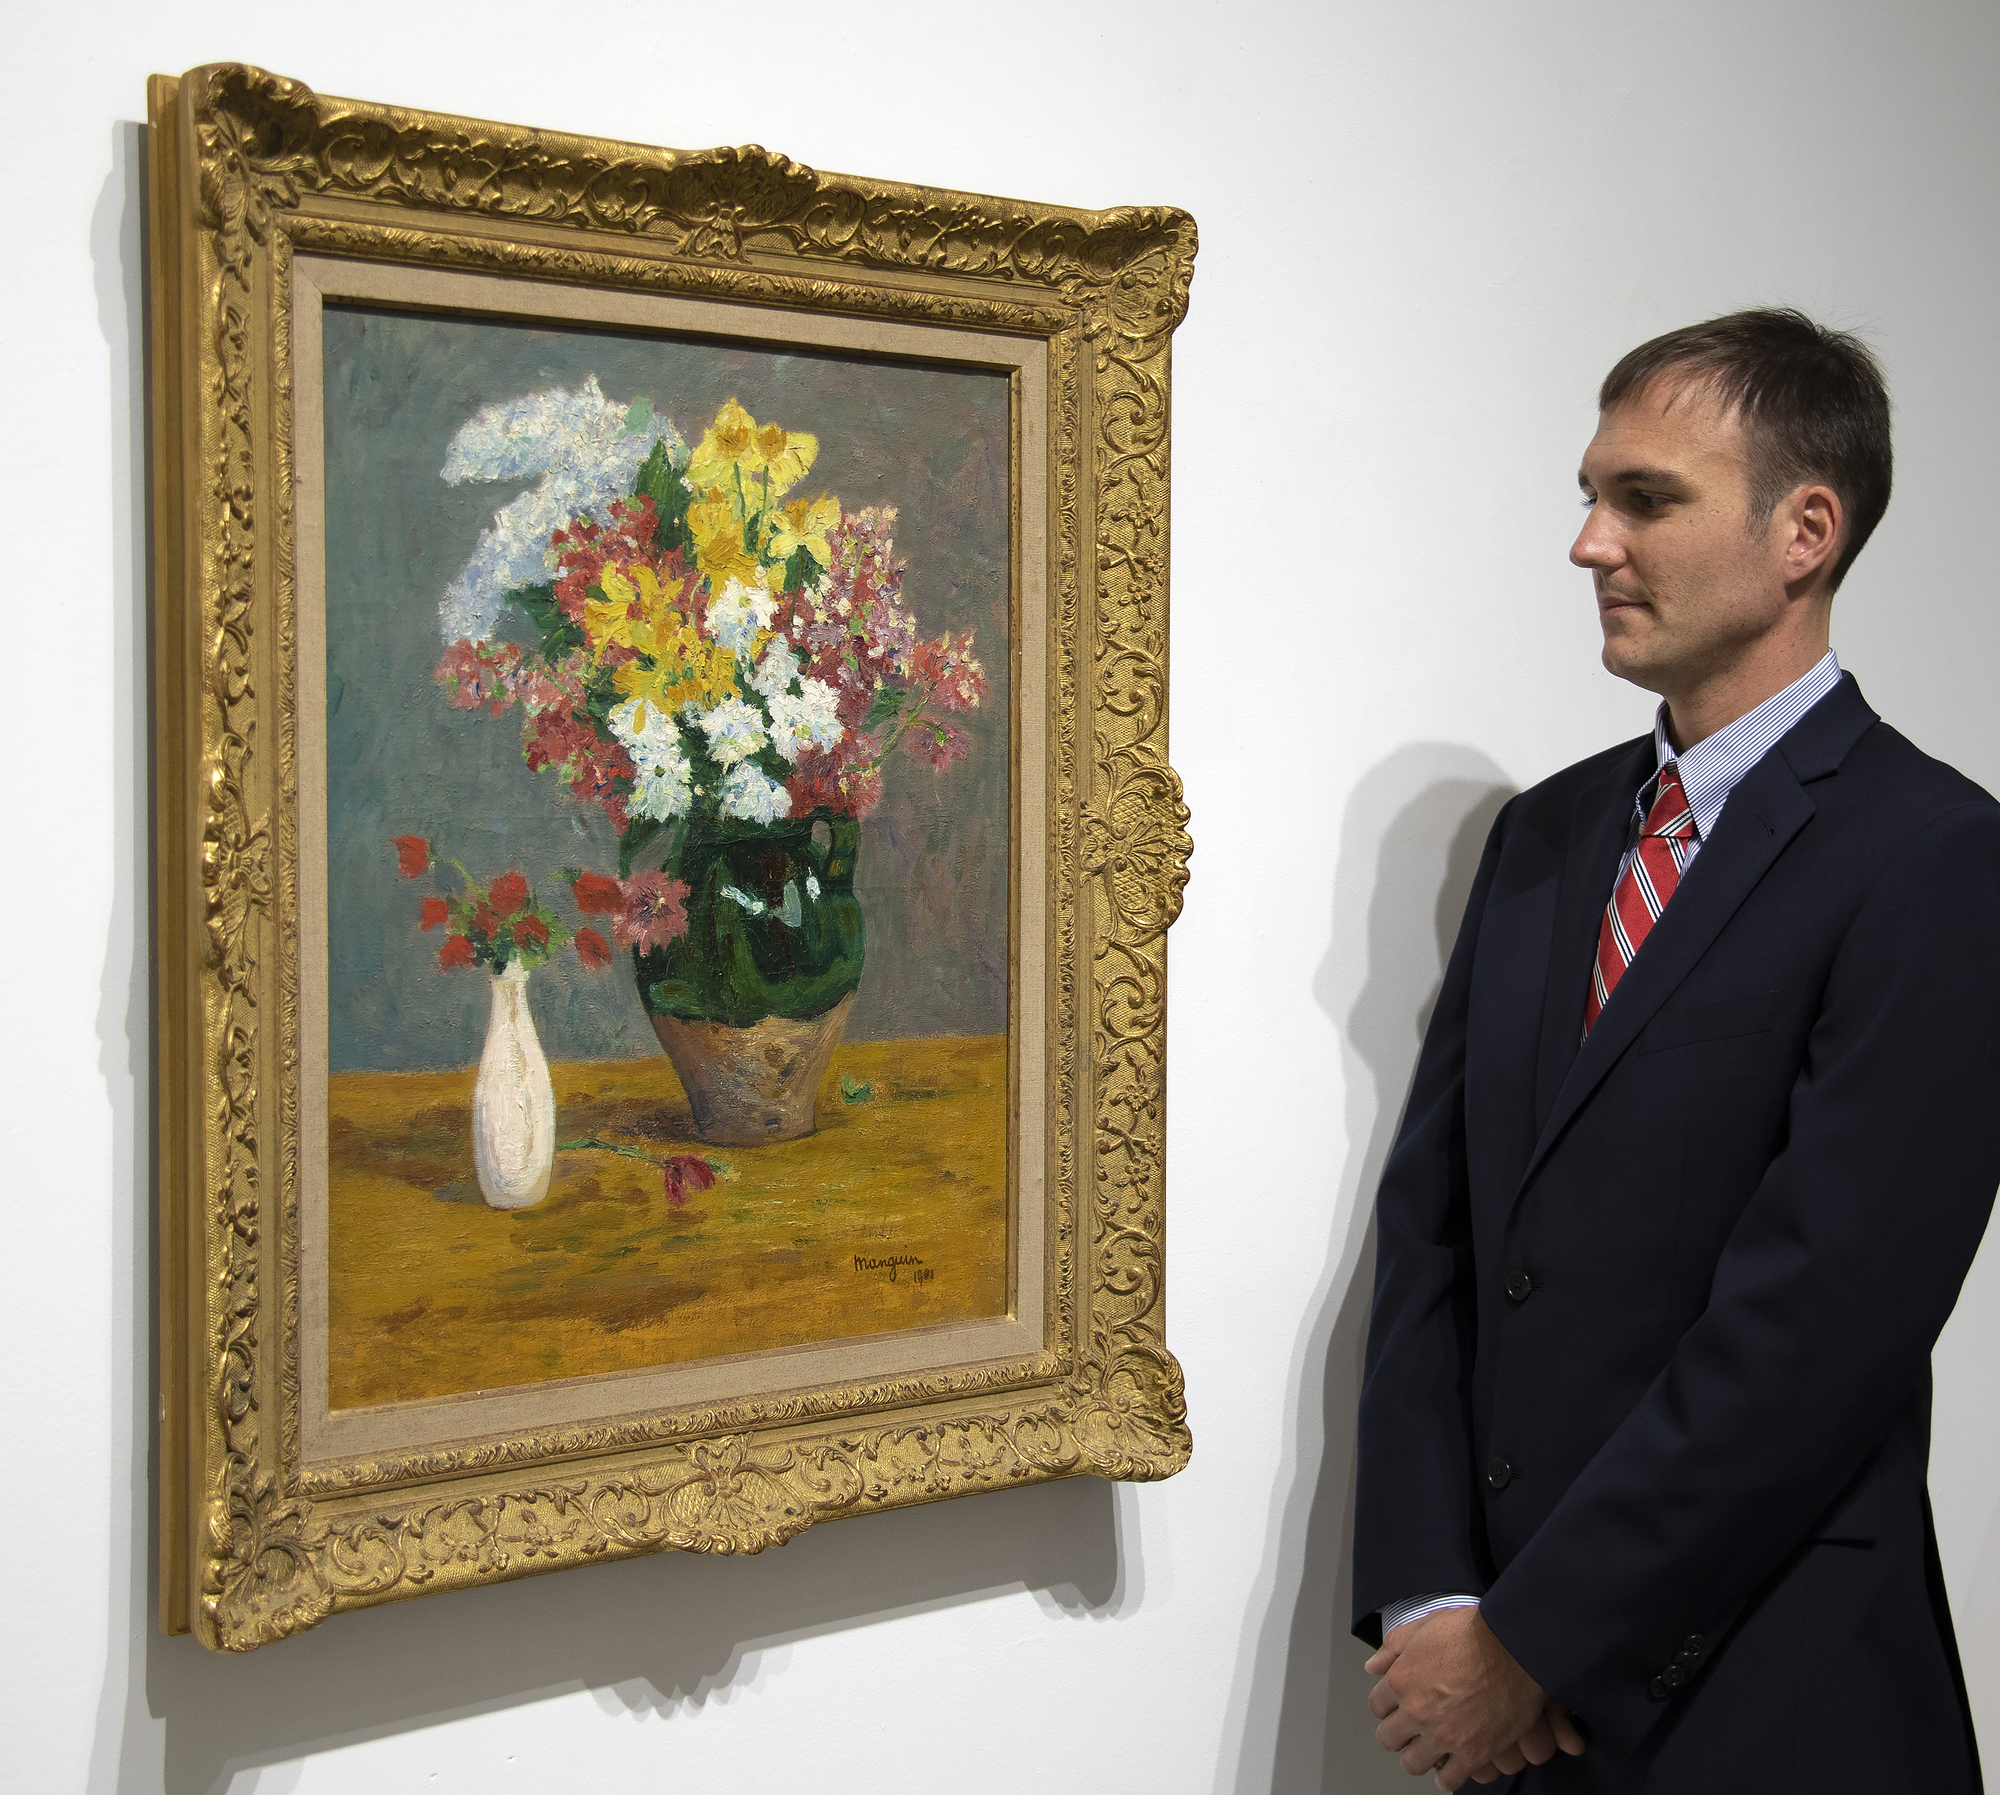 "Bouquets de Fleurs" (1901) is a glowing Post-Impressionist still life. As the revolutionary wave of Impressionism receded from its apex, artists such as Henri Manguin, Henri Matisse, Kees van Dongen, Louis Valtat, and others emerged as part of the new avant-garde in Europe. These “Fauves,” or roughly translated “wild beasts,” would attack their canvases with a bold and vibrant new palette. This completely new way of painting was not initially celebrated by critics, or the artistic elite, but is today recognized among the most innovative and original artistic movements of the 20th Century.    <br><br>The present work, painted just before the revolution of Fauvism took hold, demonstrates a critical transitionary period in Modern Art. The subject is depicted with a masterful compositional sense and attention to spatial relationships. Manguin’s competency in composition would allow him to experiment freely with color during the first decade of the 20th Century. The slightly later but comparable Manguin still life “Flowers” (1915) is in the permanent collection of the Hermitage Museum, St. Petersburg, Russia.